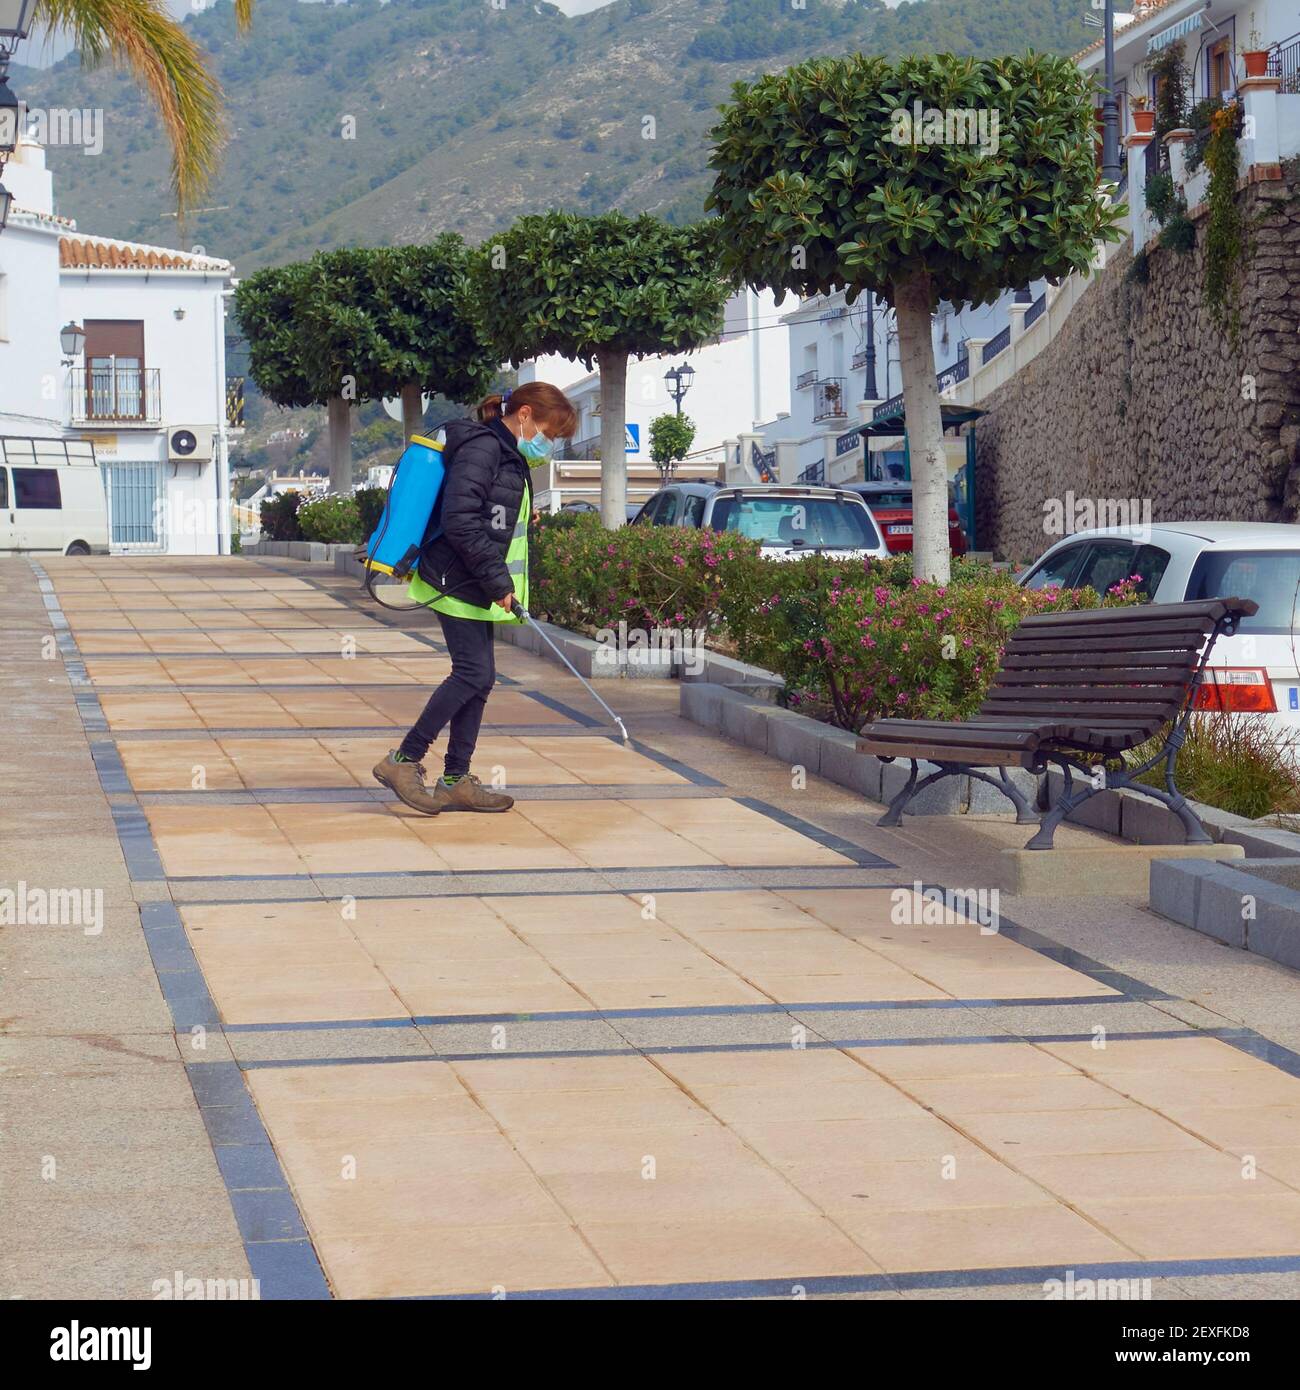 A female worker sprays disinfectant on the pavement to fight Covid-19 in the whitewashed tourist village of Frigiliana, Malaga, Spain Stock Photo